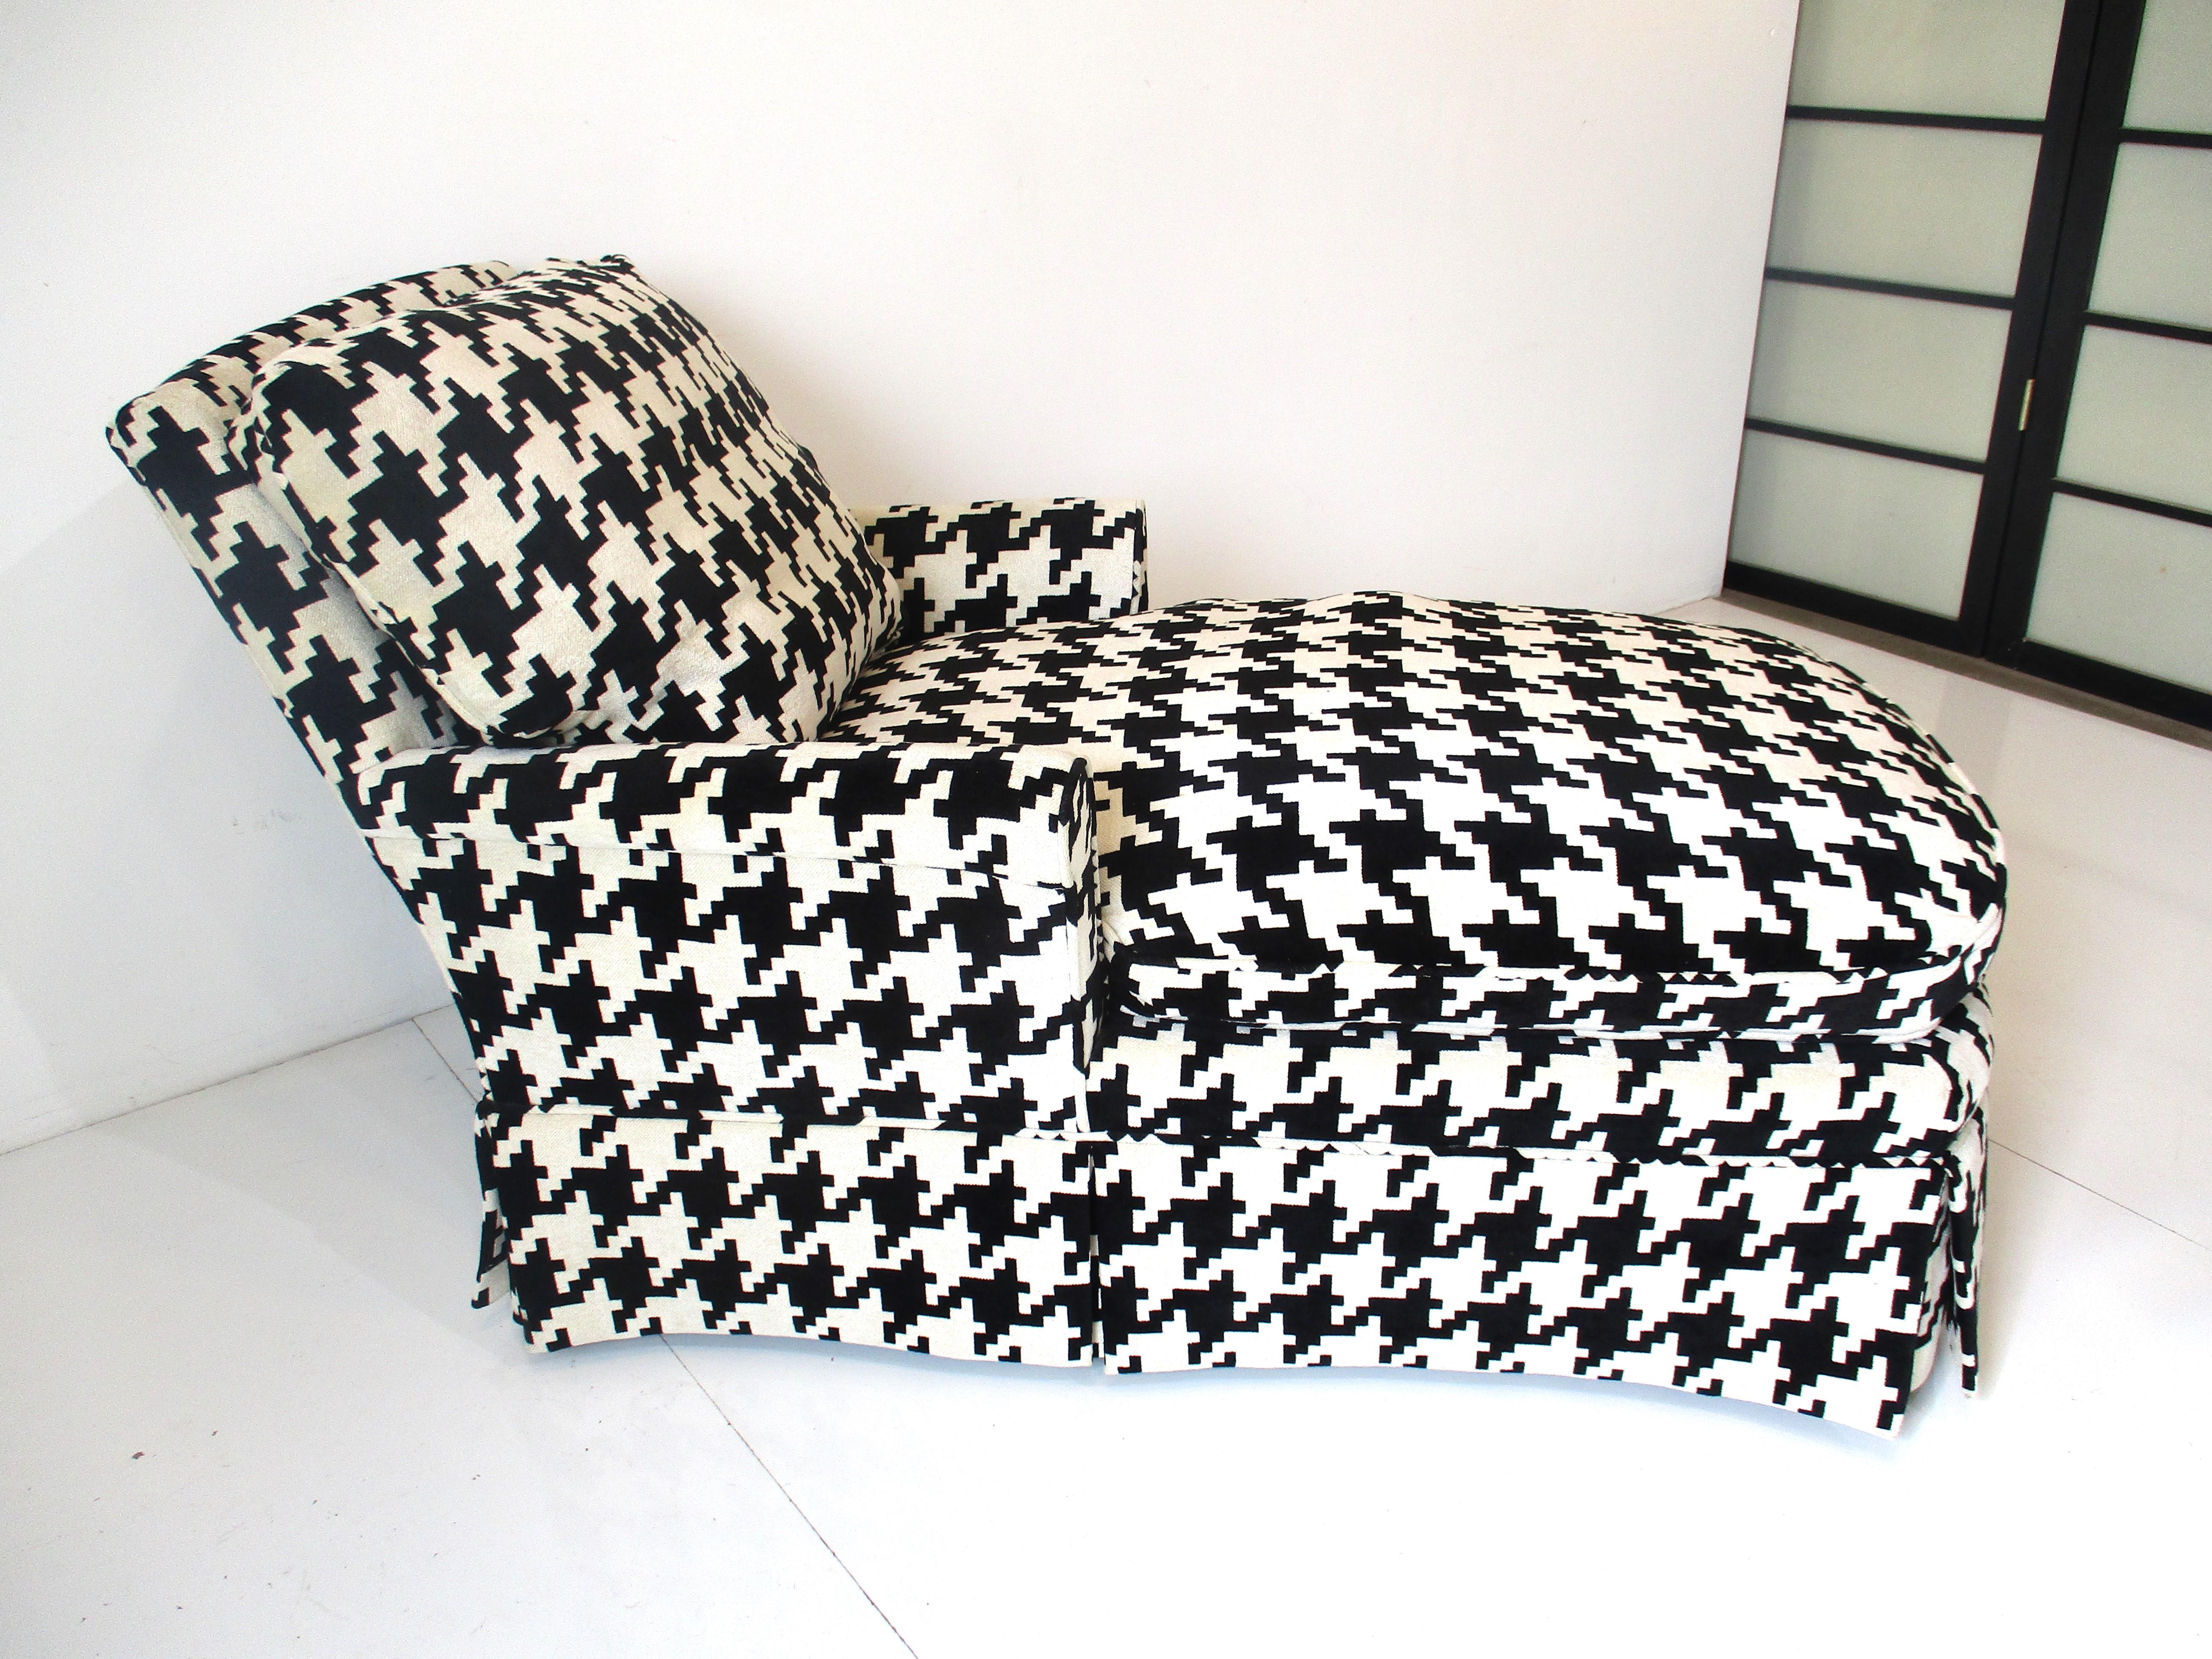 A very well upholstered chaise lounge chair in a Kravet luxury houndstooth soft feder chenlle weave fabric in a bold modern black and white. Super comfortable having a separate back and long bottom cushion both down filled and arms at the perfect